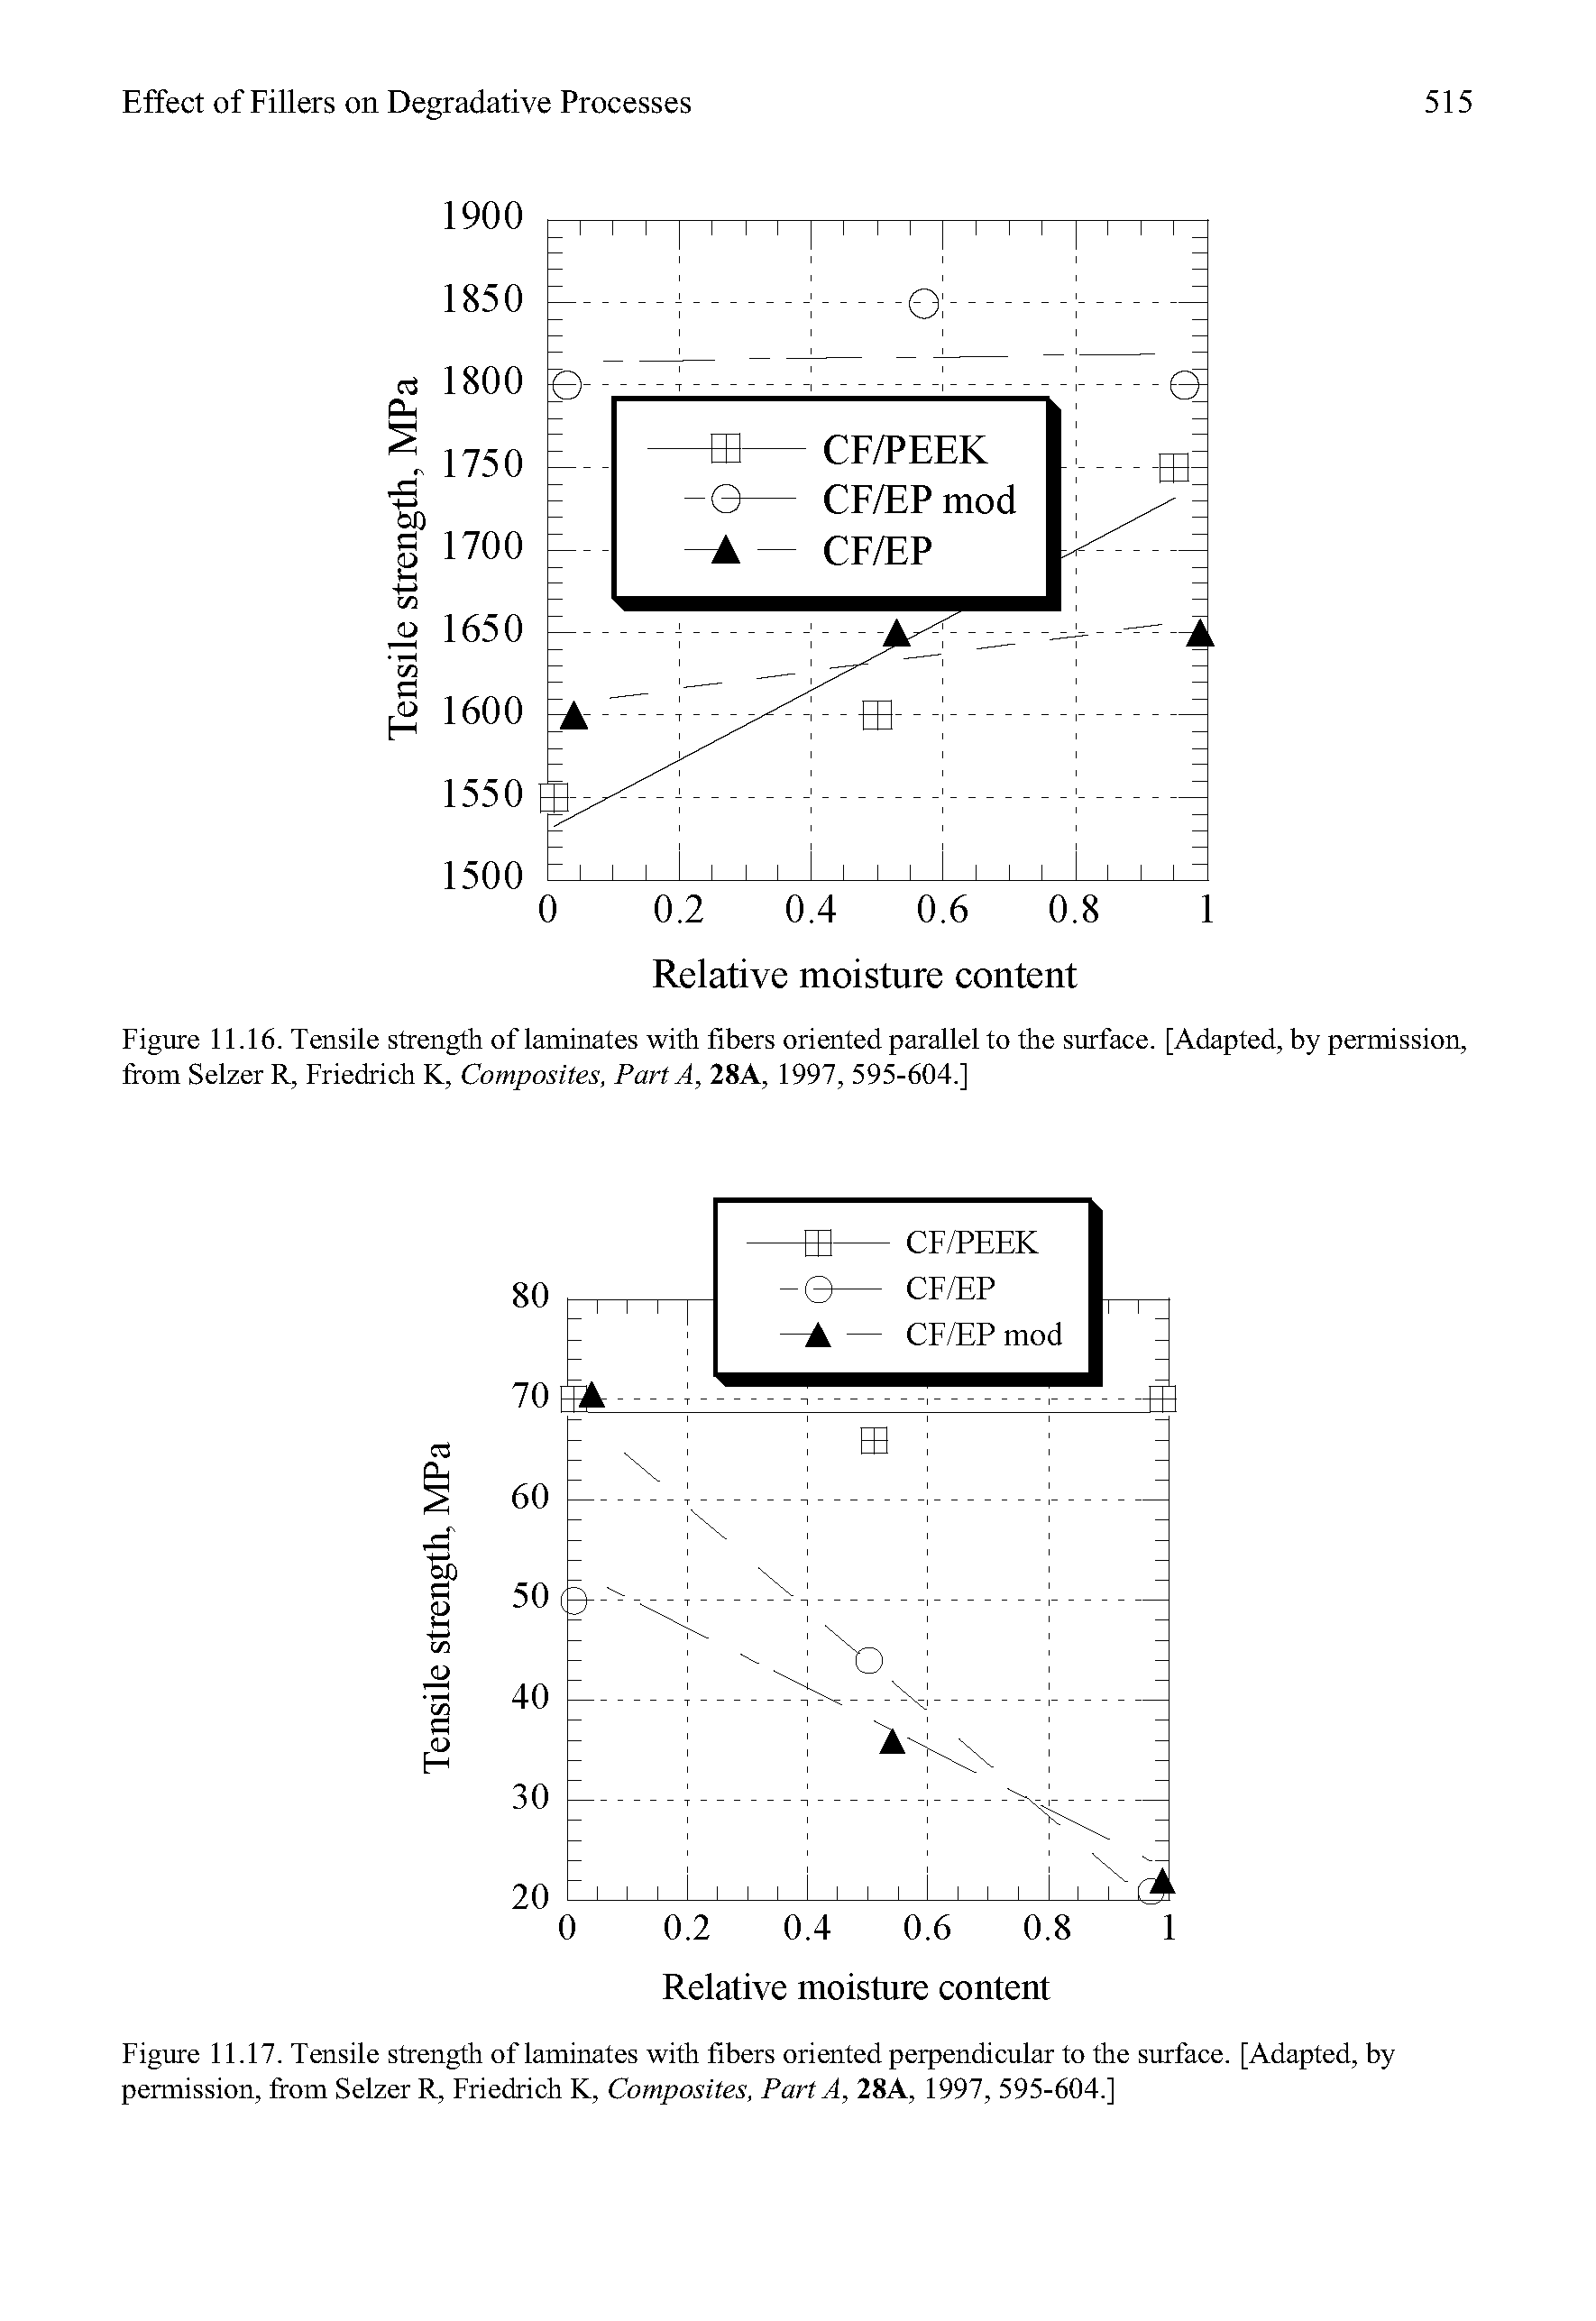 Figure 11.16. Tensile strength of laminates with fibers oriented parallel to the surface. [Adapted, by permission, from Selzer R, Friedrich K, Composites, Part A, 28A, 1997, 595-604.]...